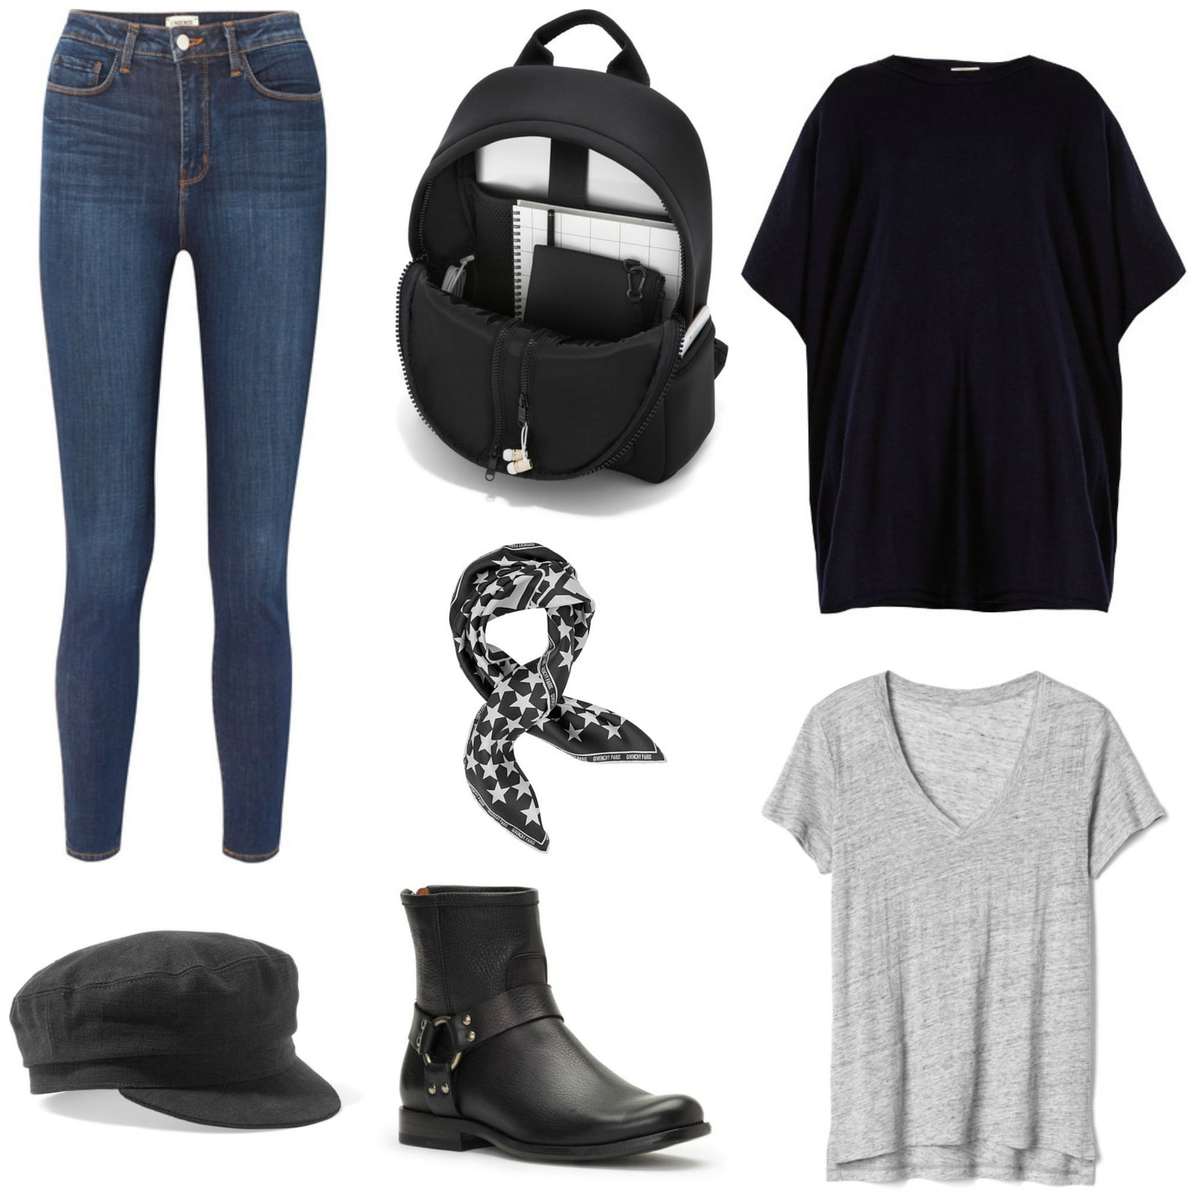 Capsule wardrobe for the teleworker featuring a black poncho tunic, skinny stretch jeans, and black accessories.